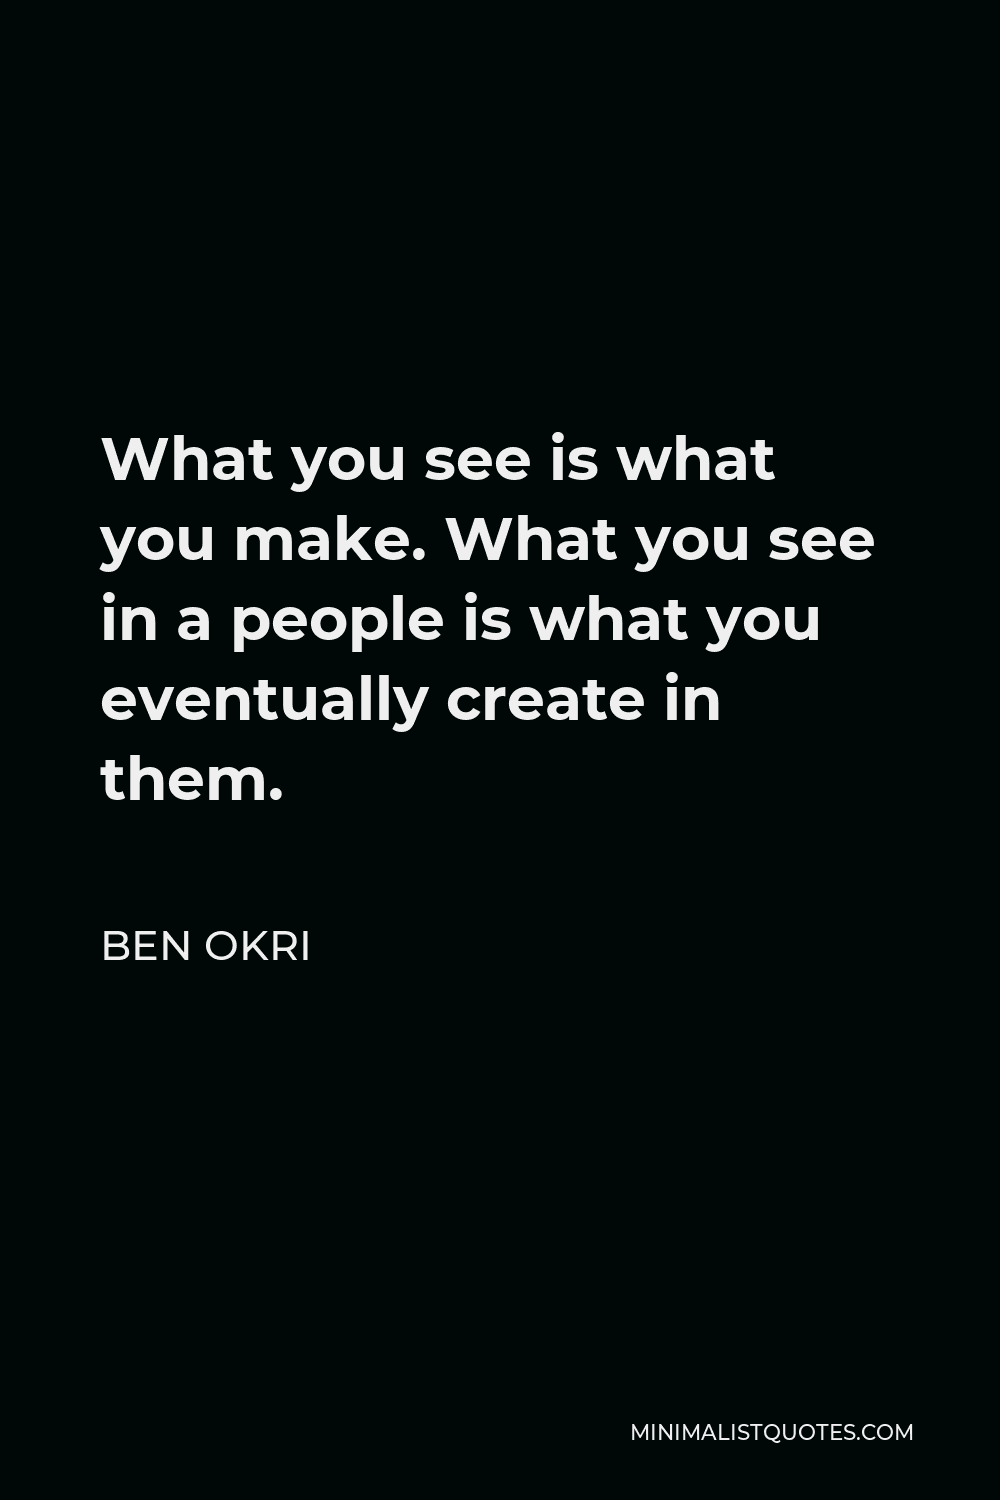 Ben Okri Quote - What you see is what you make. What you see in a people is what you eventually create in them.